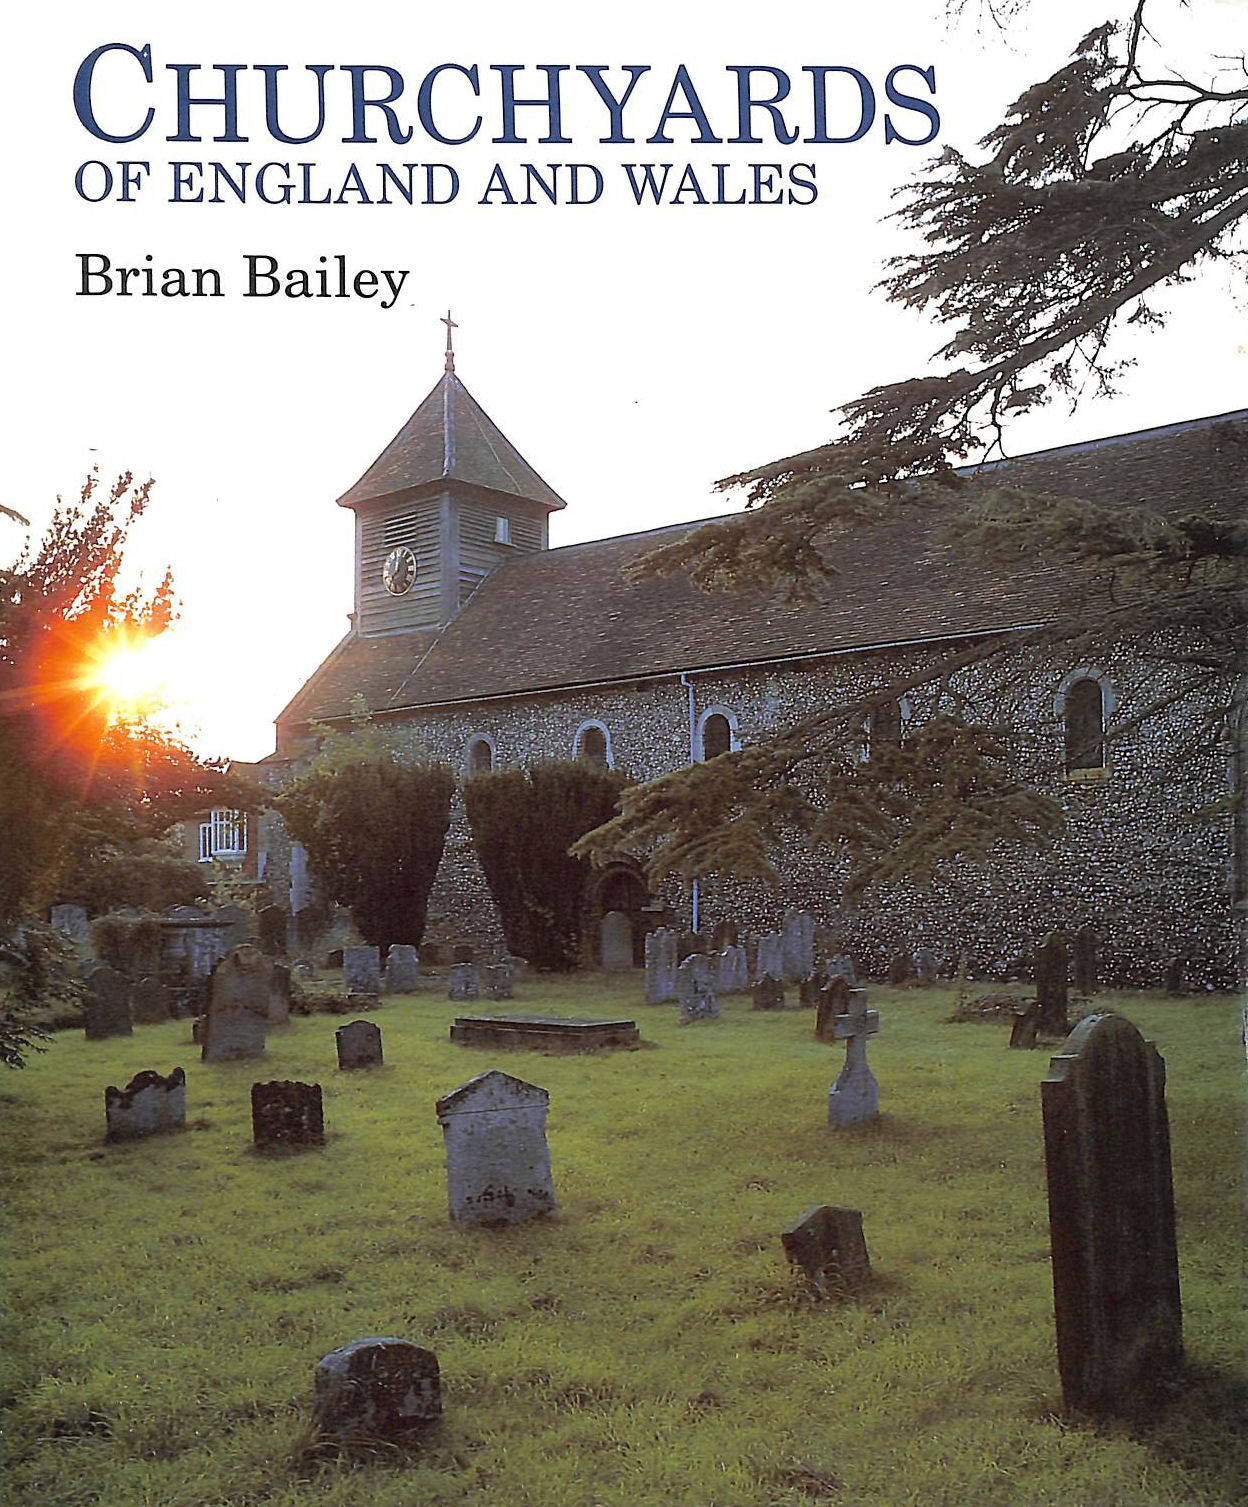 BAILEY, BRIAN J. - Churchyards of England and Wales